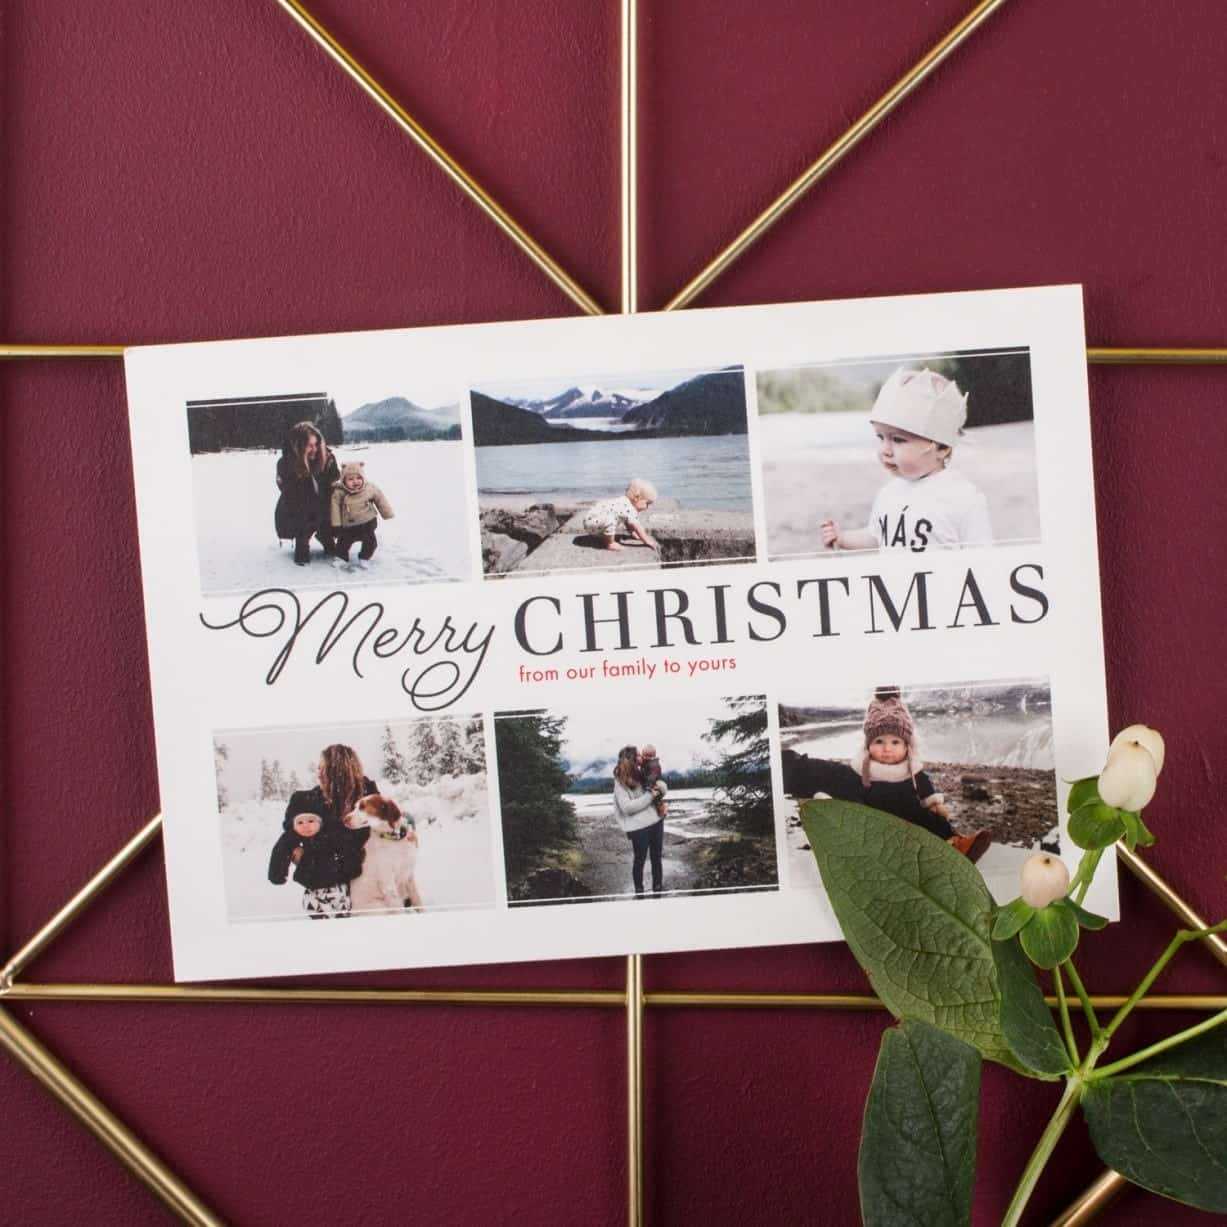 10 Fonts Perfect For The Holidays | Inspirationfeed With Regard To Free Photoshop Christmas Card Templates For Photographers